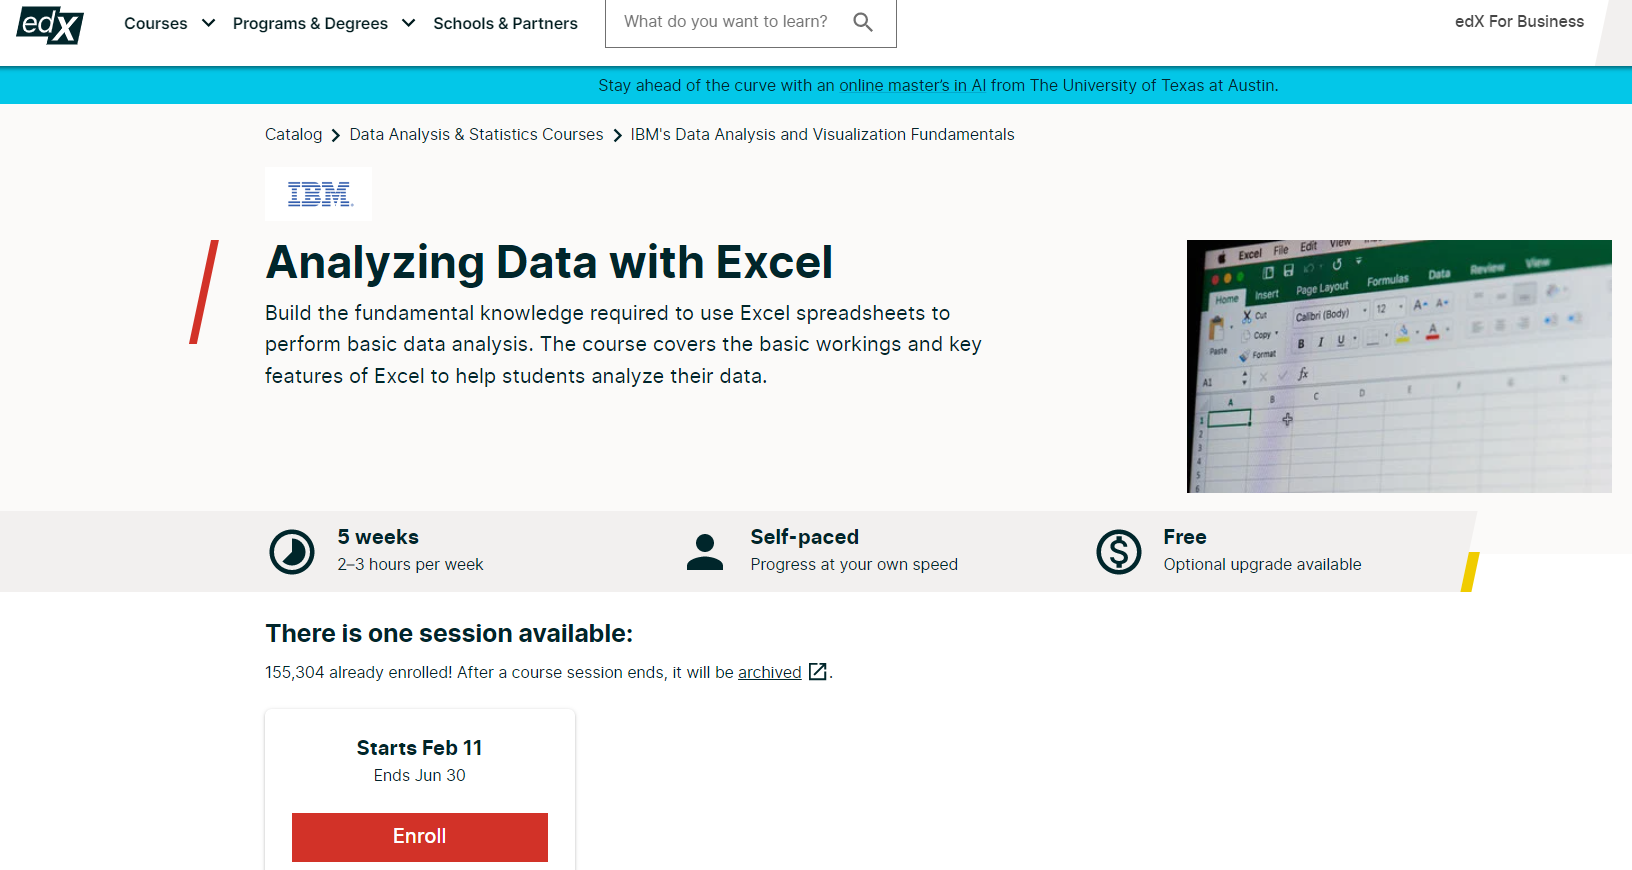 Analyzing Data with Excel (edX)